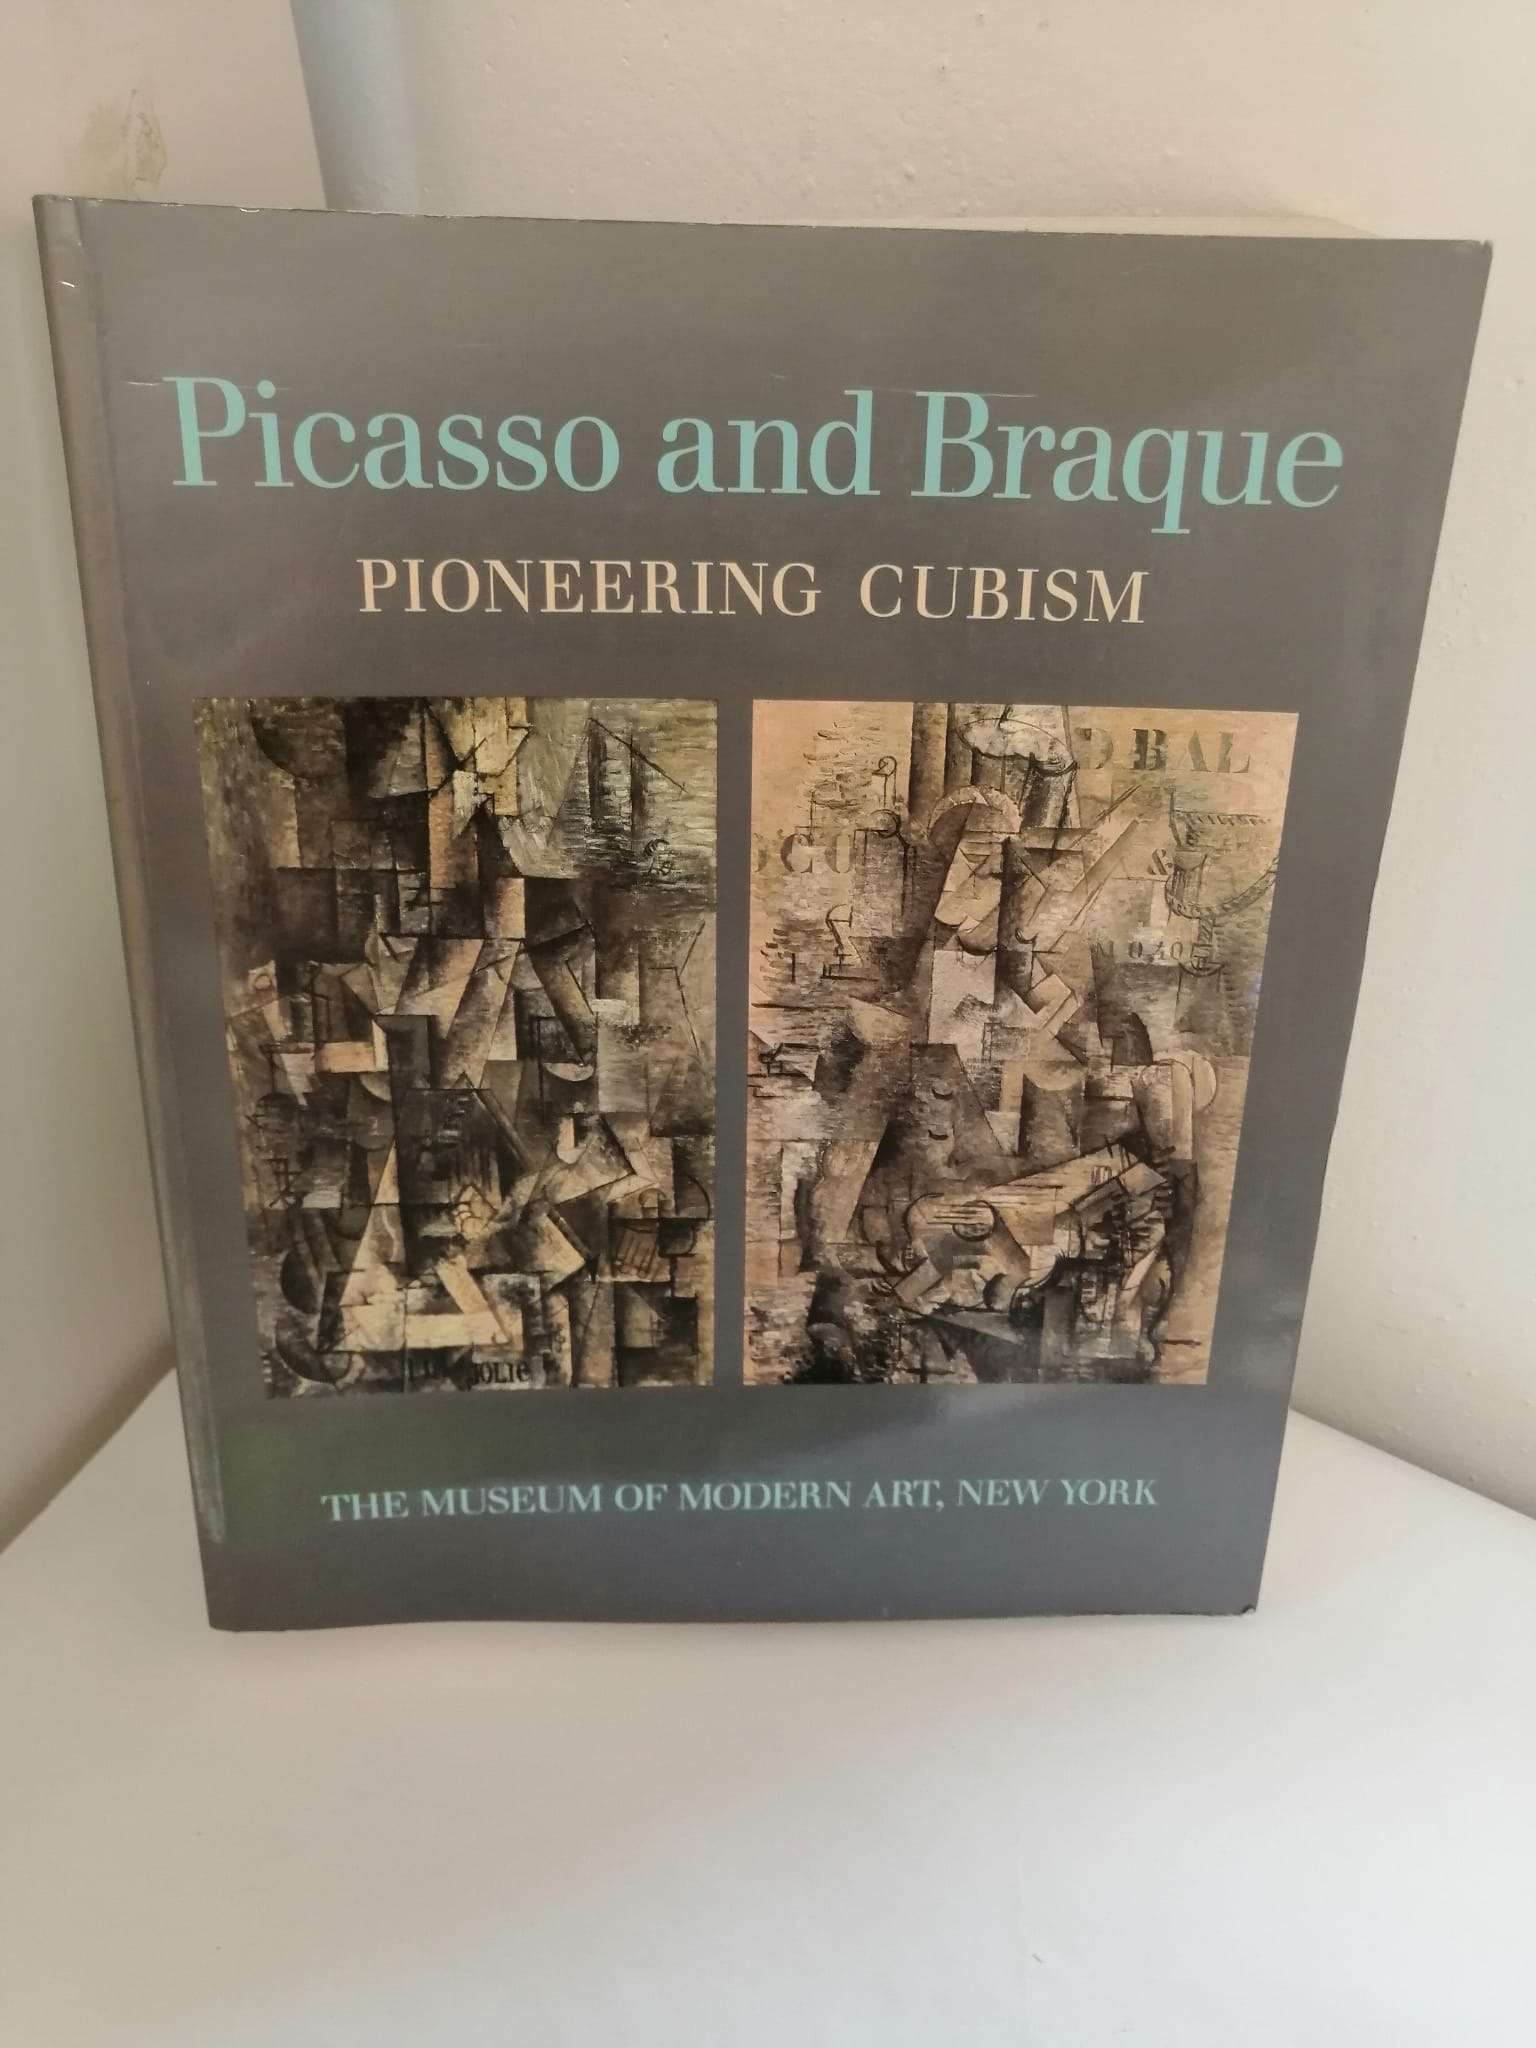 PICASSO AND BRAQUE. Pioneering cubism